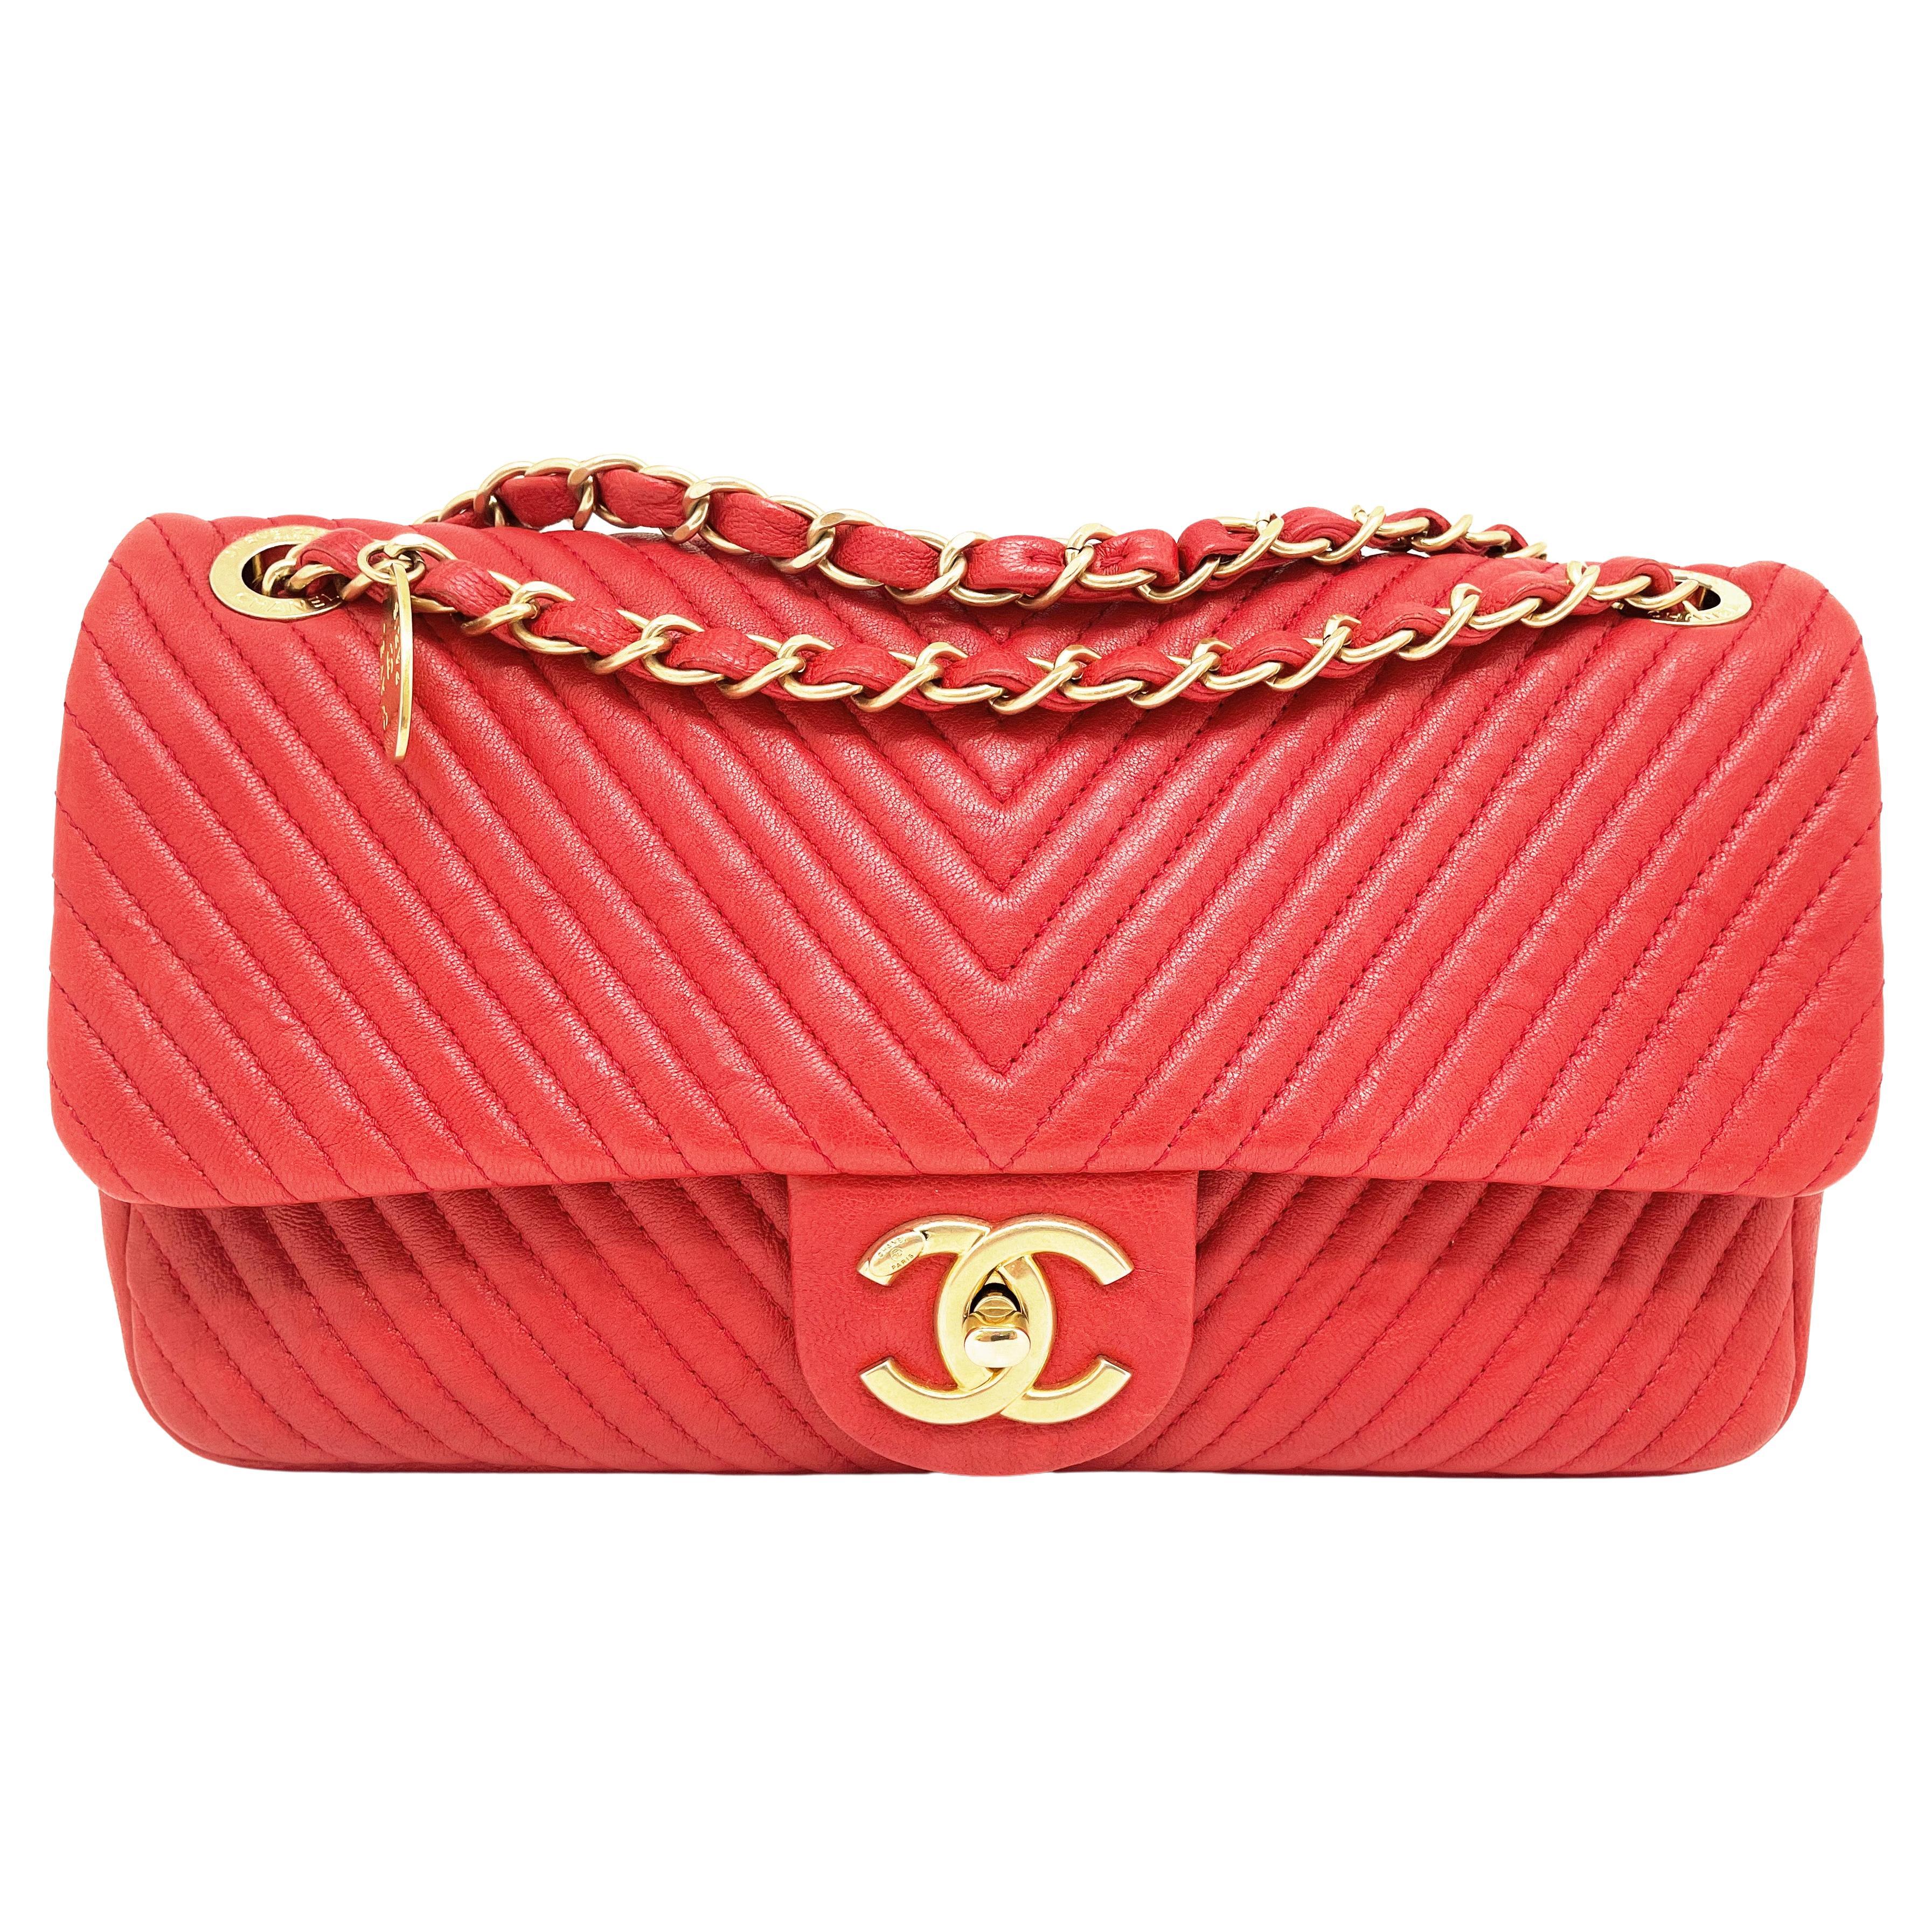 Superb Chanel 27 cm bag in leather and Valentine Red Chevron pattern